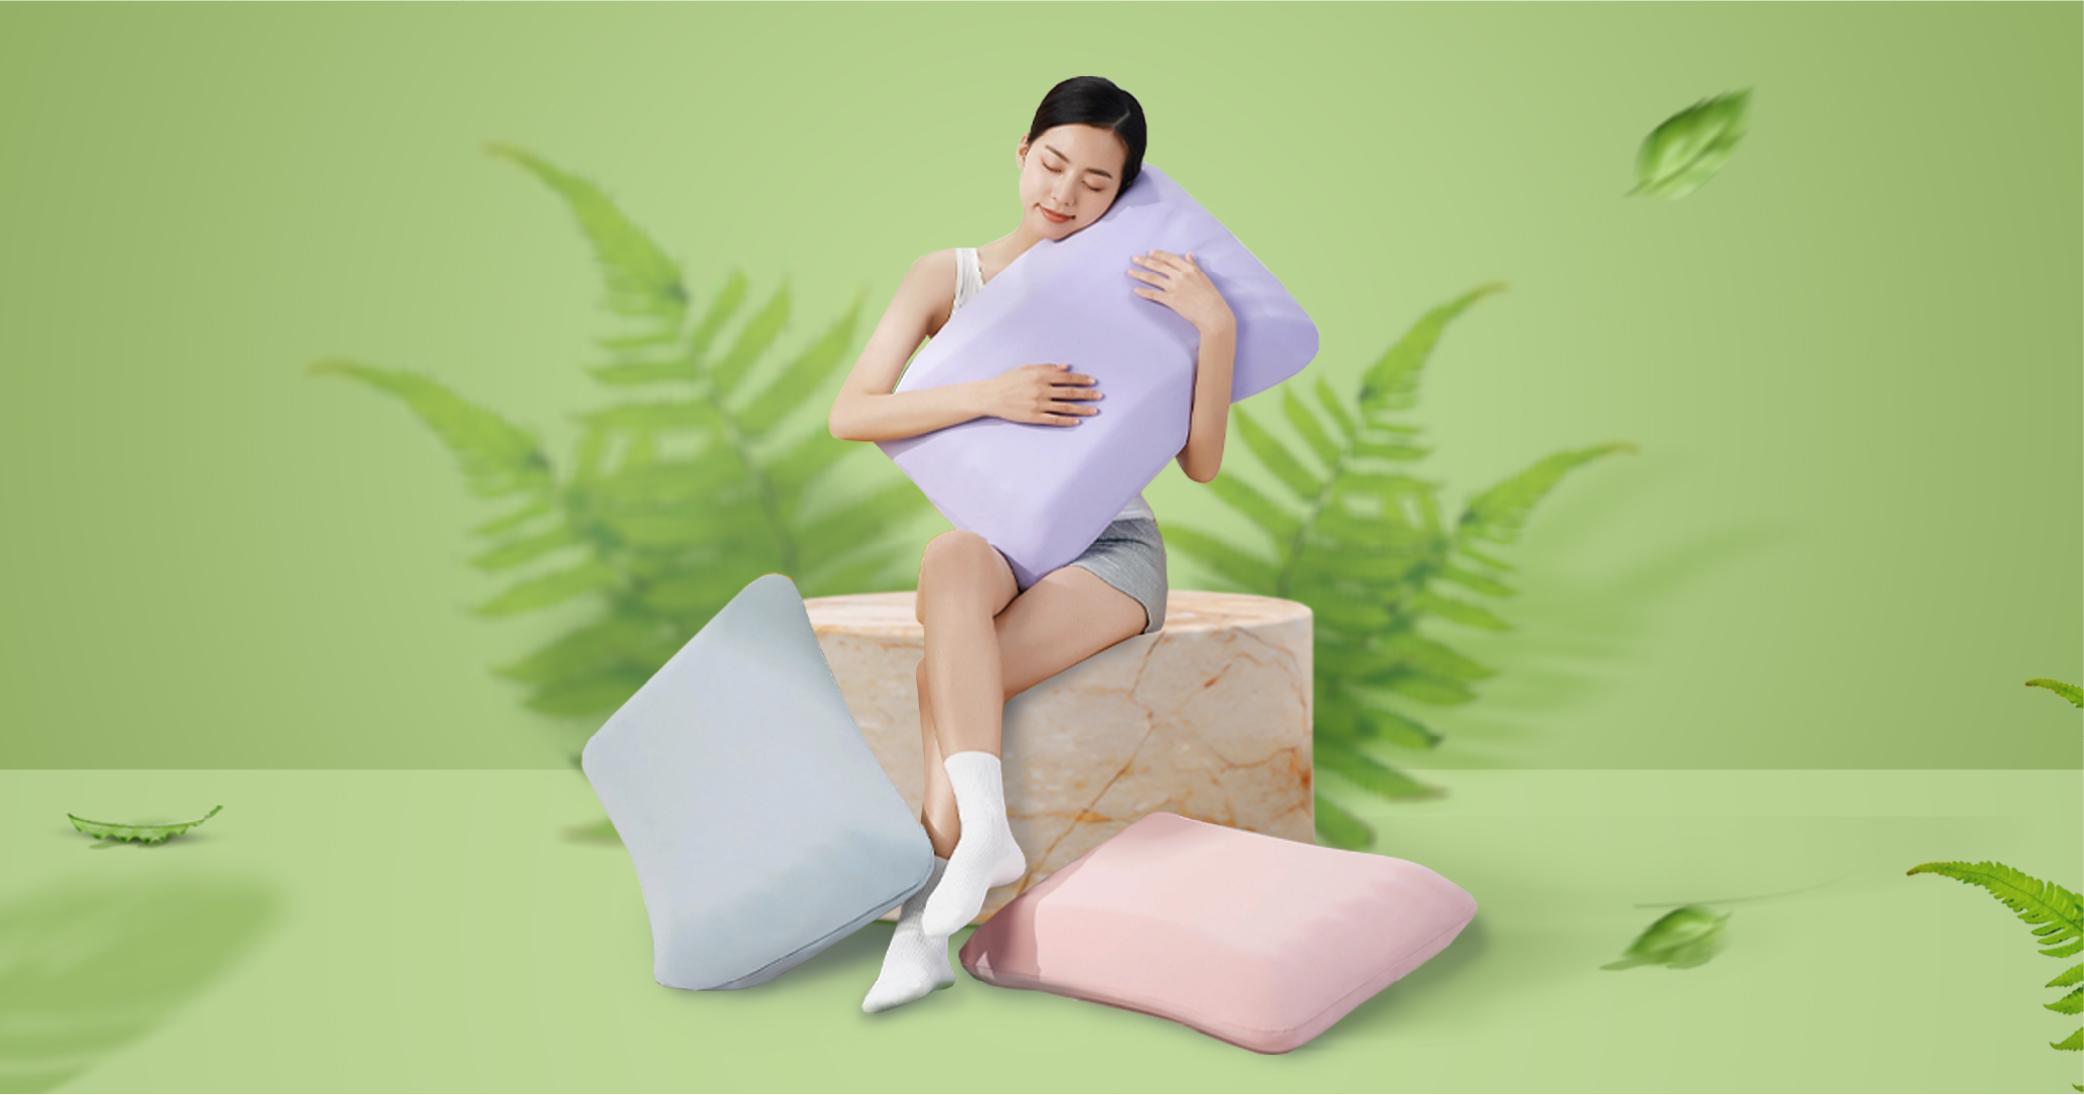 WHICH TYPE OF PILLOW IS GOOD FOR HEALTH?